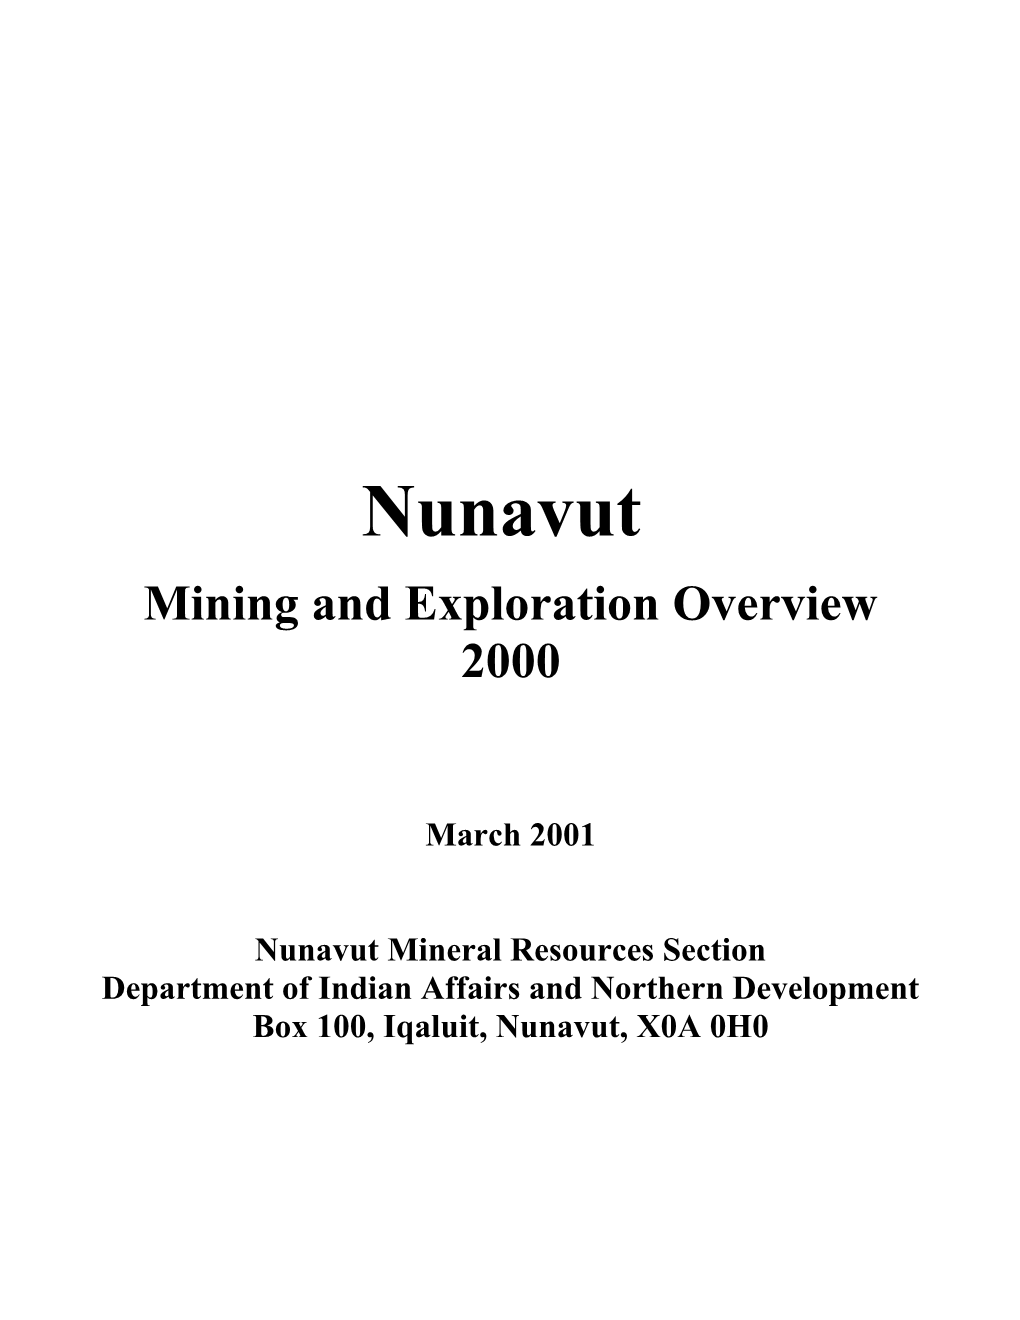 Mining and Exploration Overview 2000